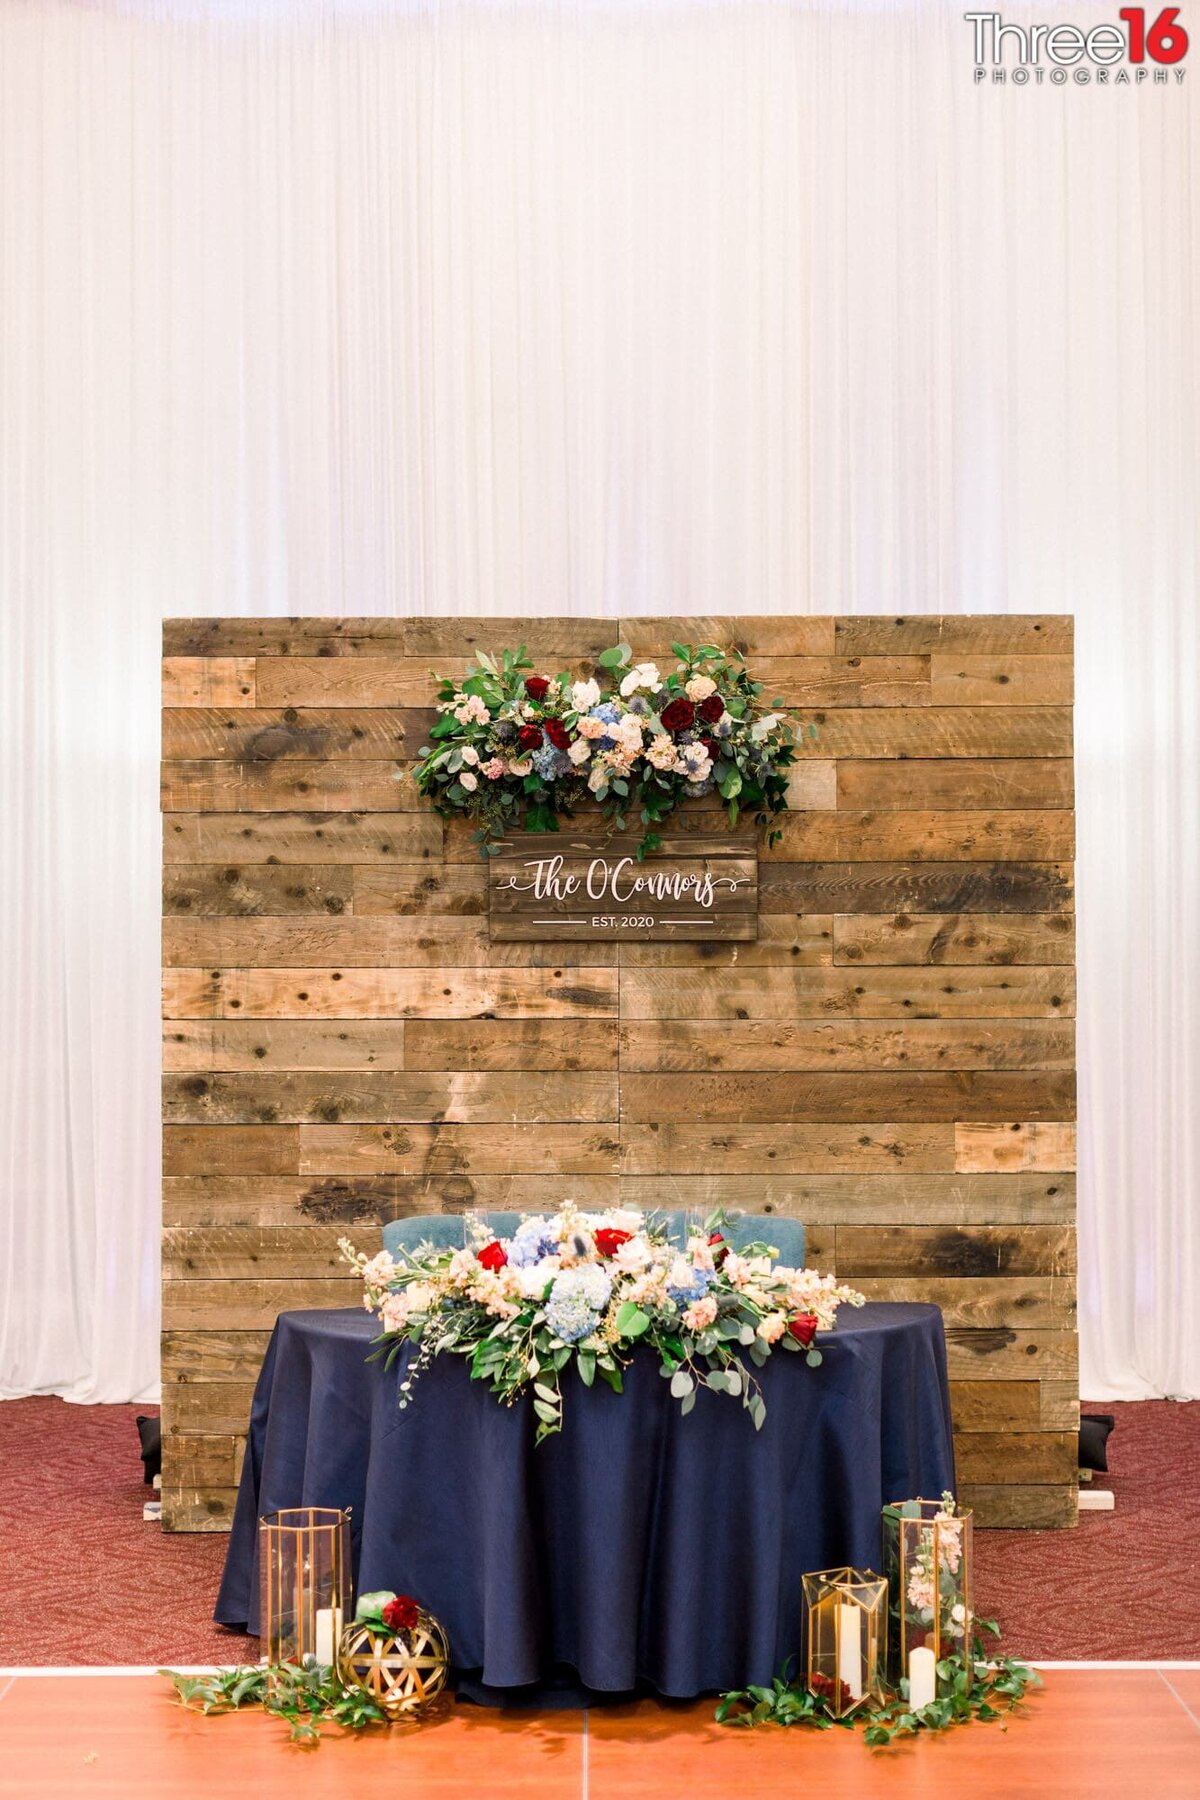 Sweetheart table decked out with flowers and a wood-backed wall